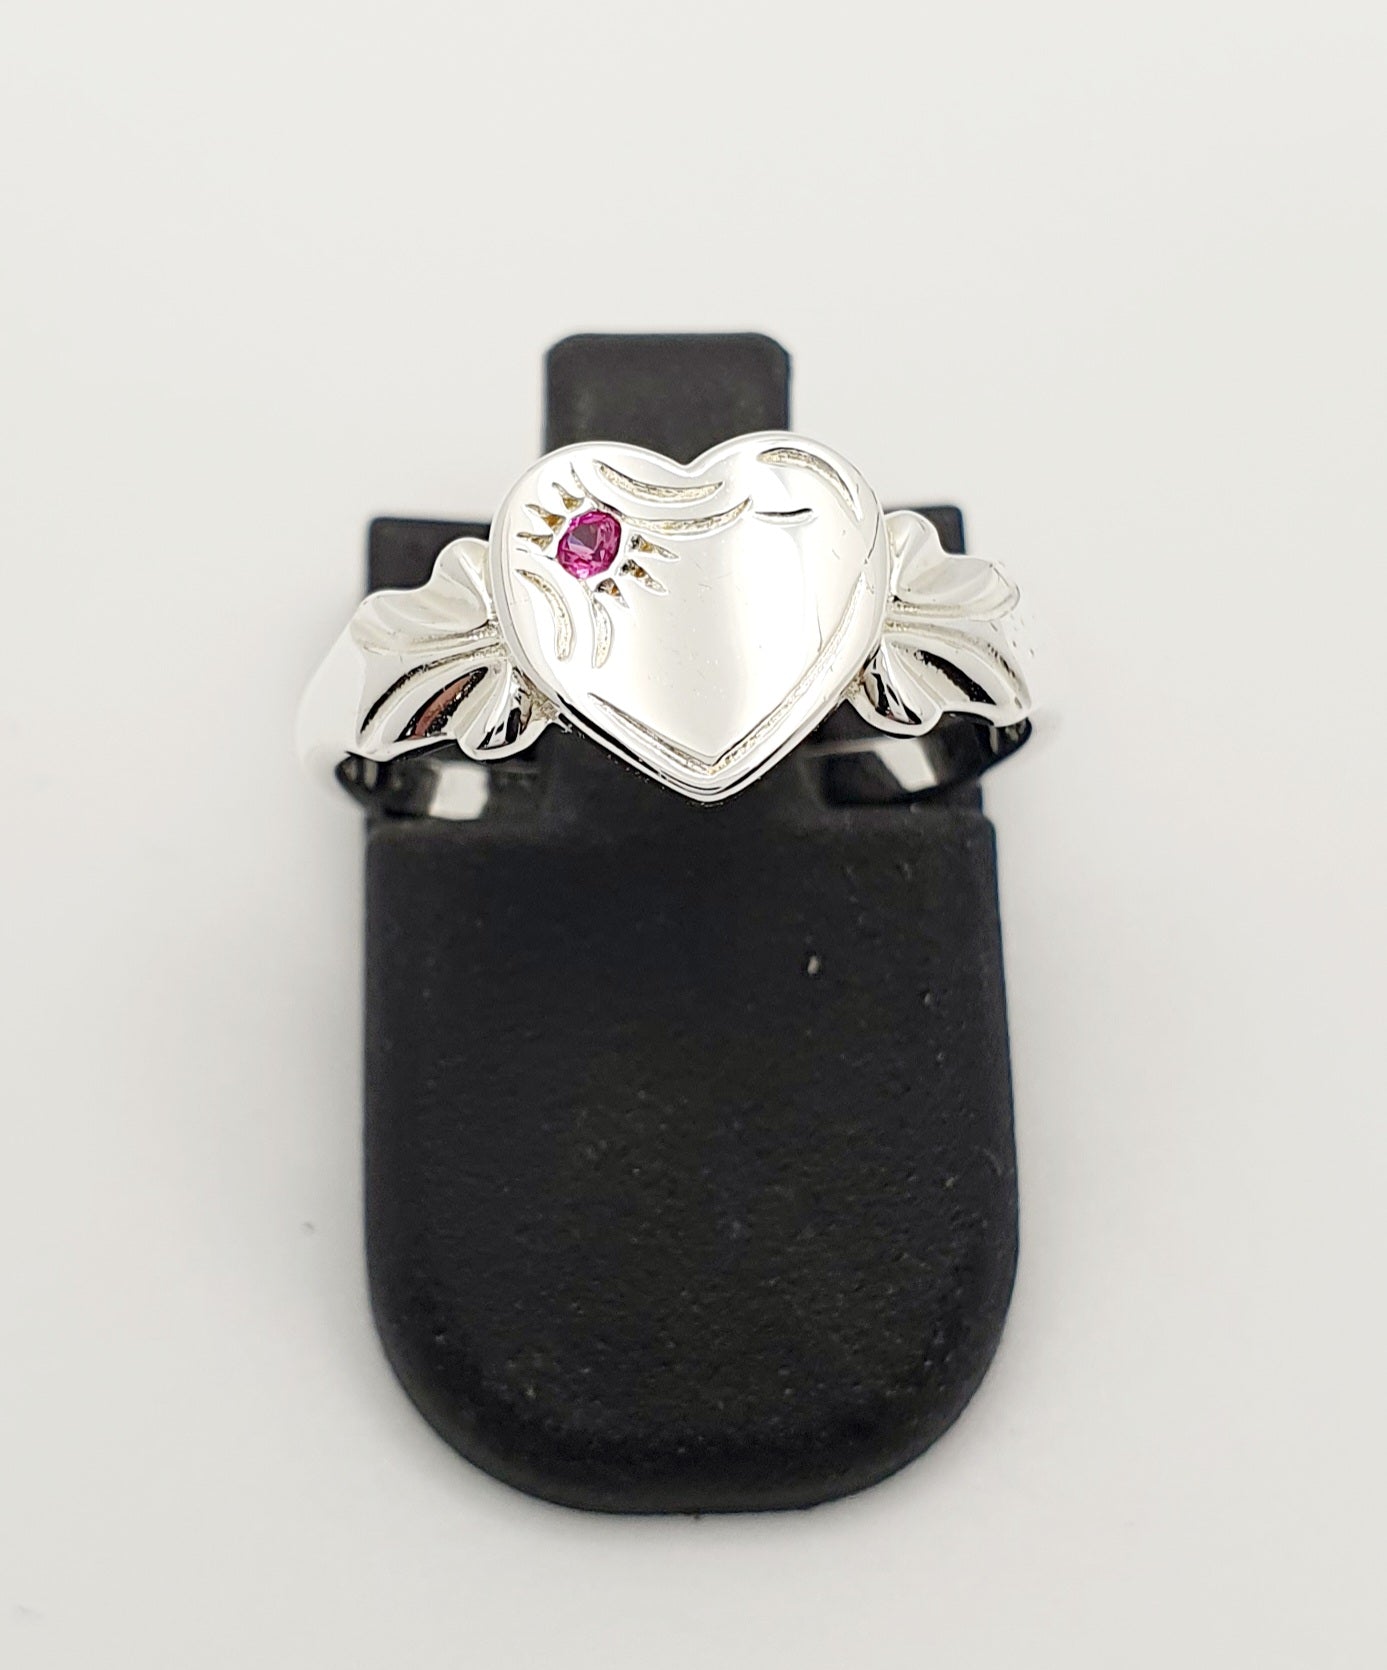 S/S Heart Signet Ring With Red Stone. Size J